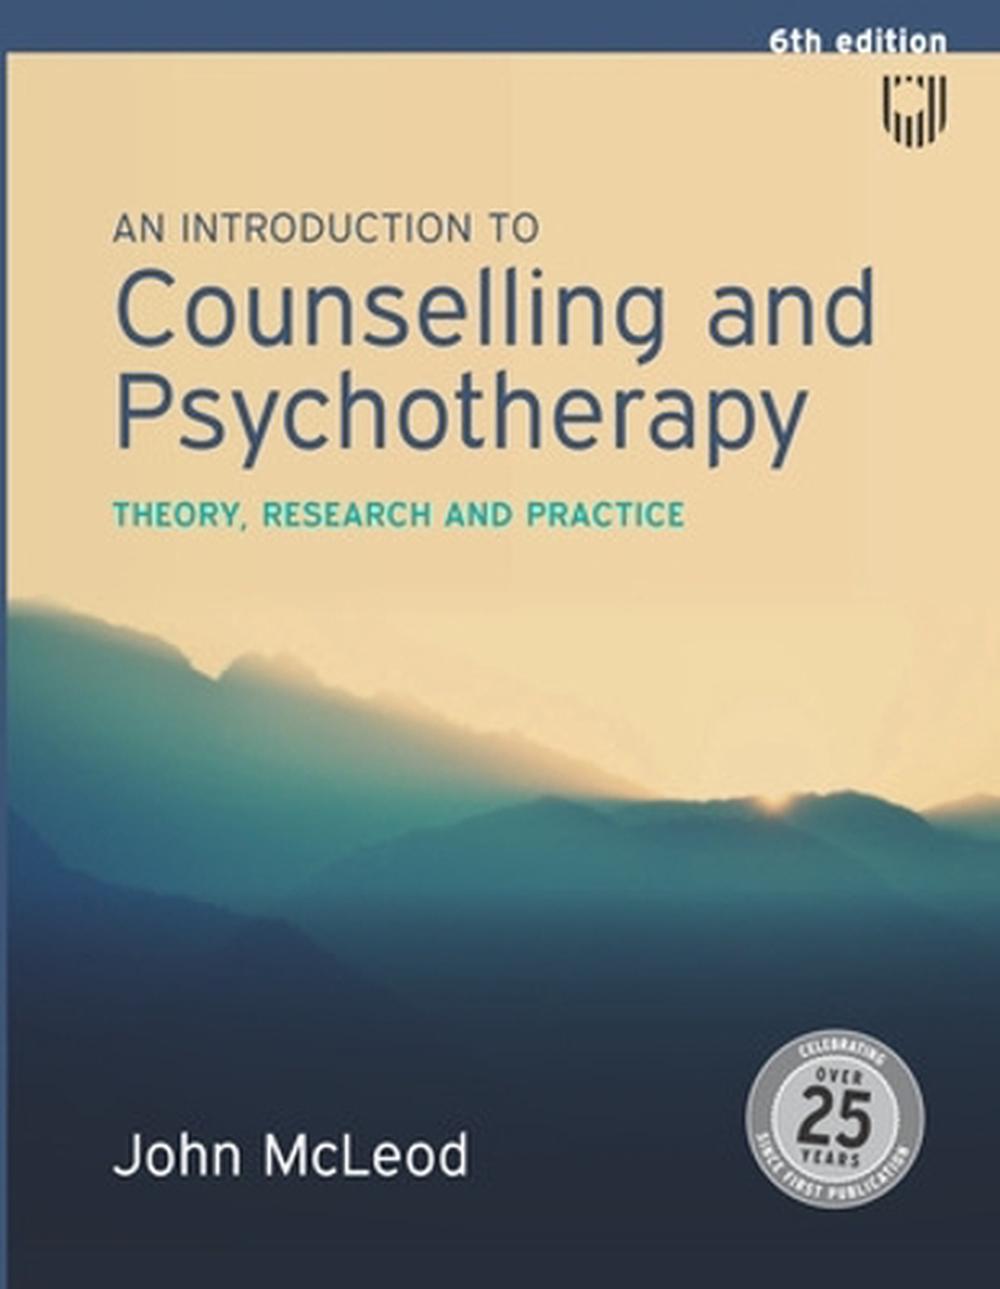 essential research findings in counselling and psychotherapy pdf